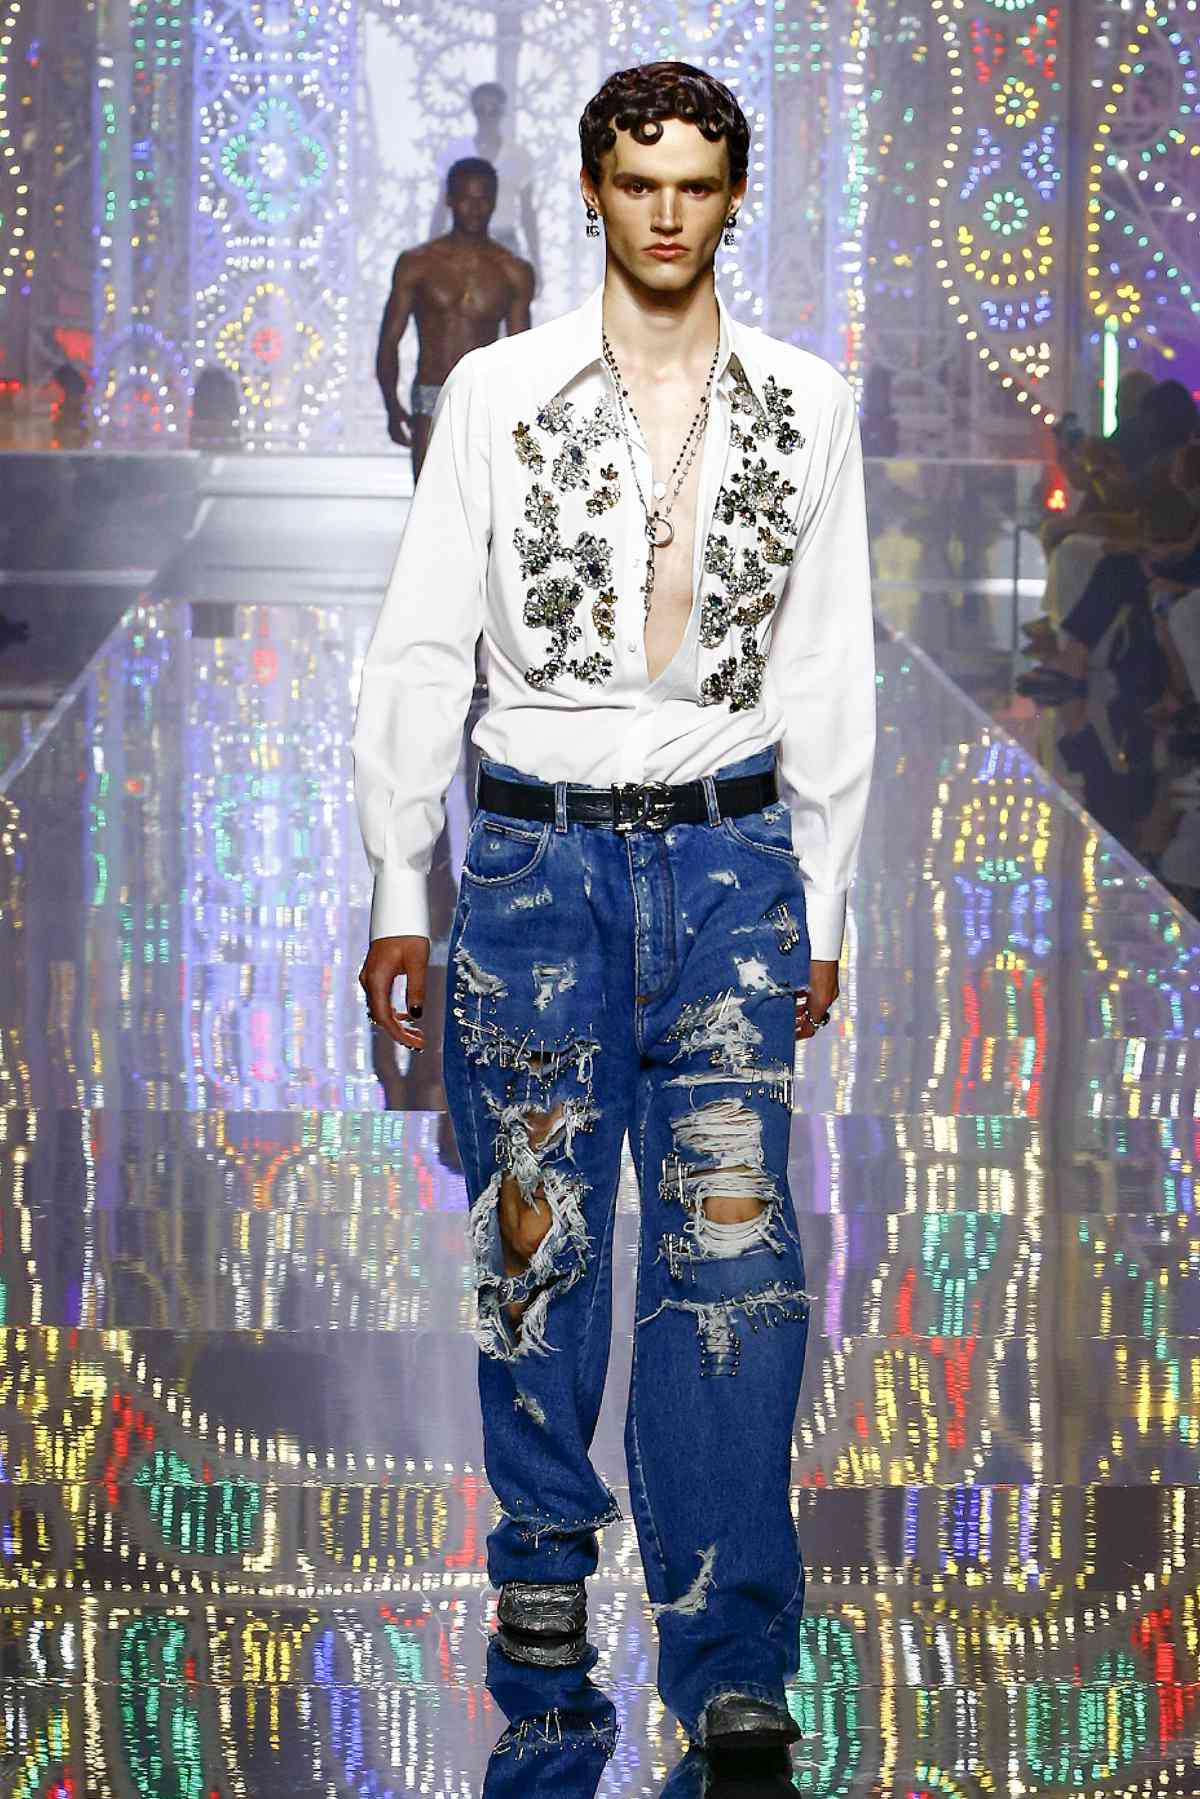 Dolce&Gabbana Presents Its New Spring Summer 2022 Men’s Fashion Show: #DGLightTherapy